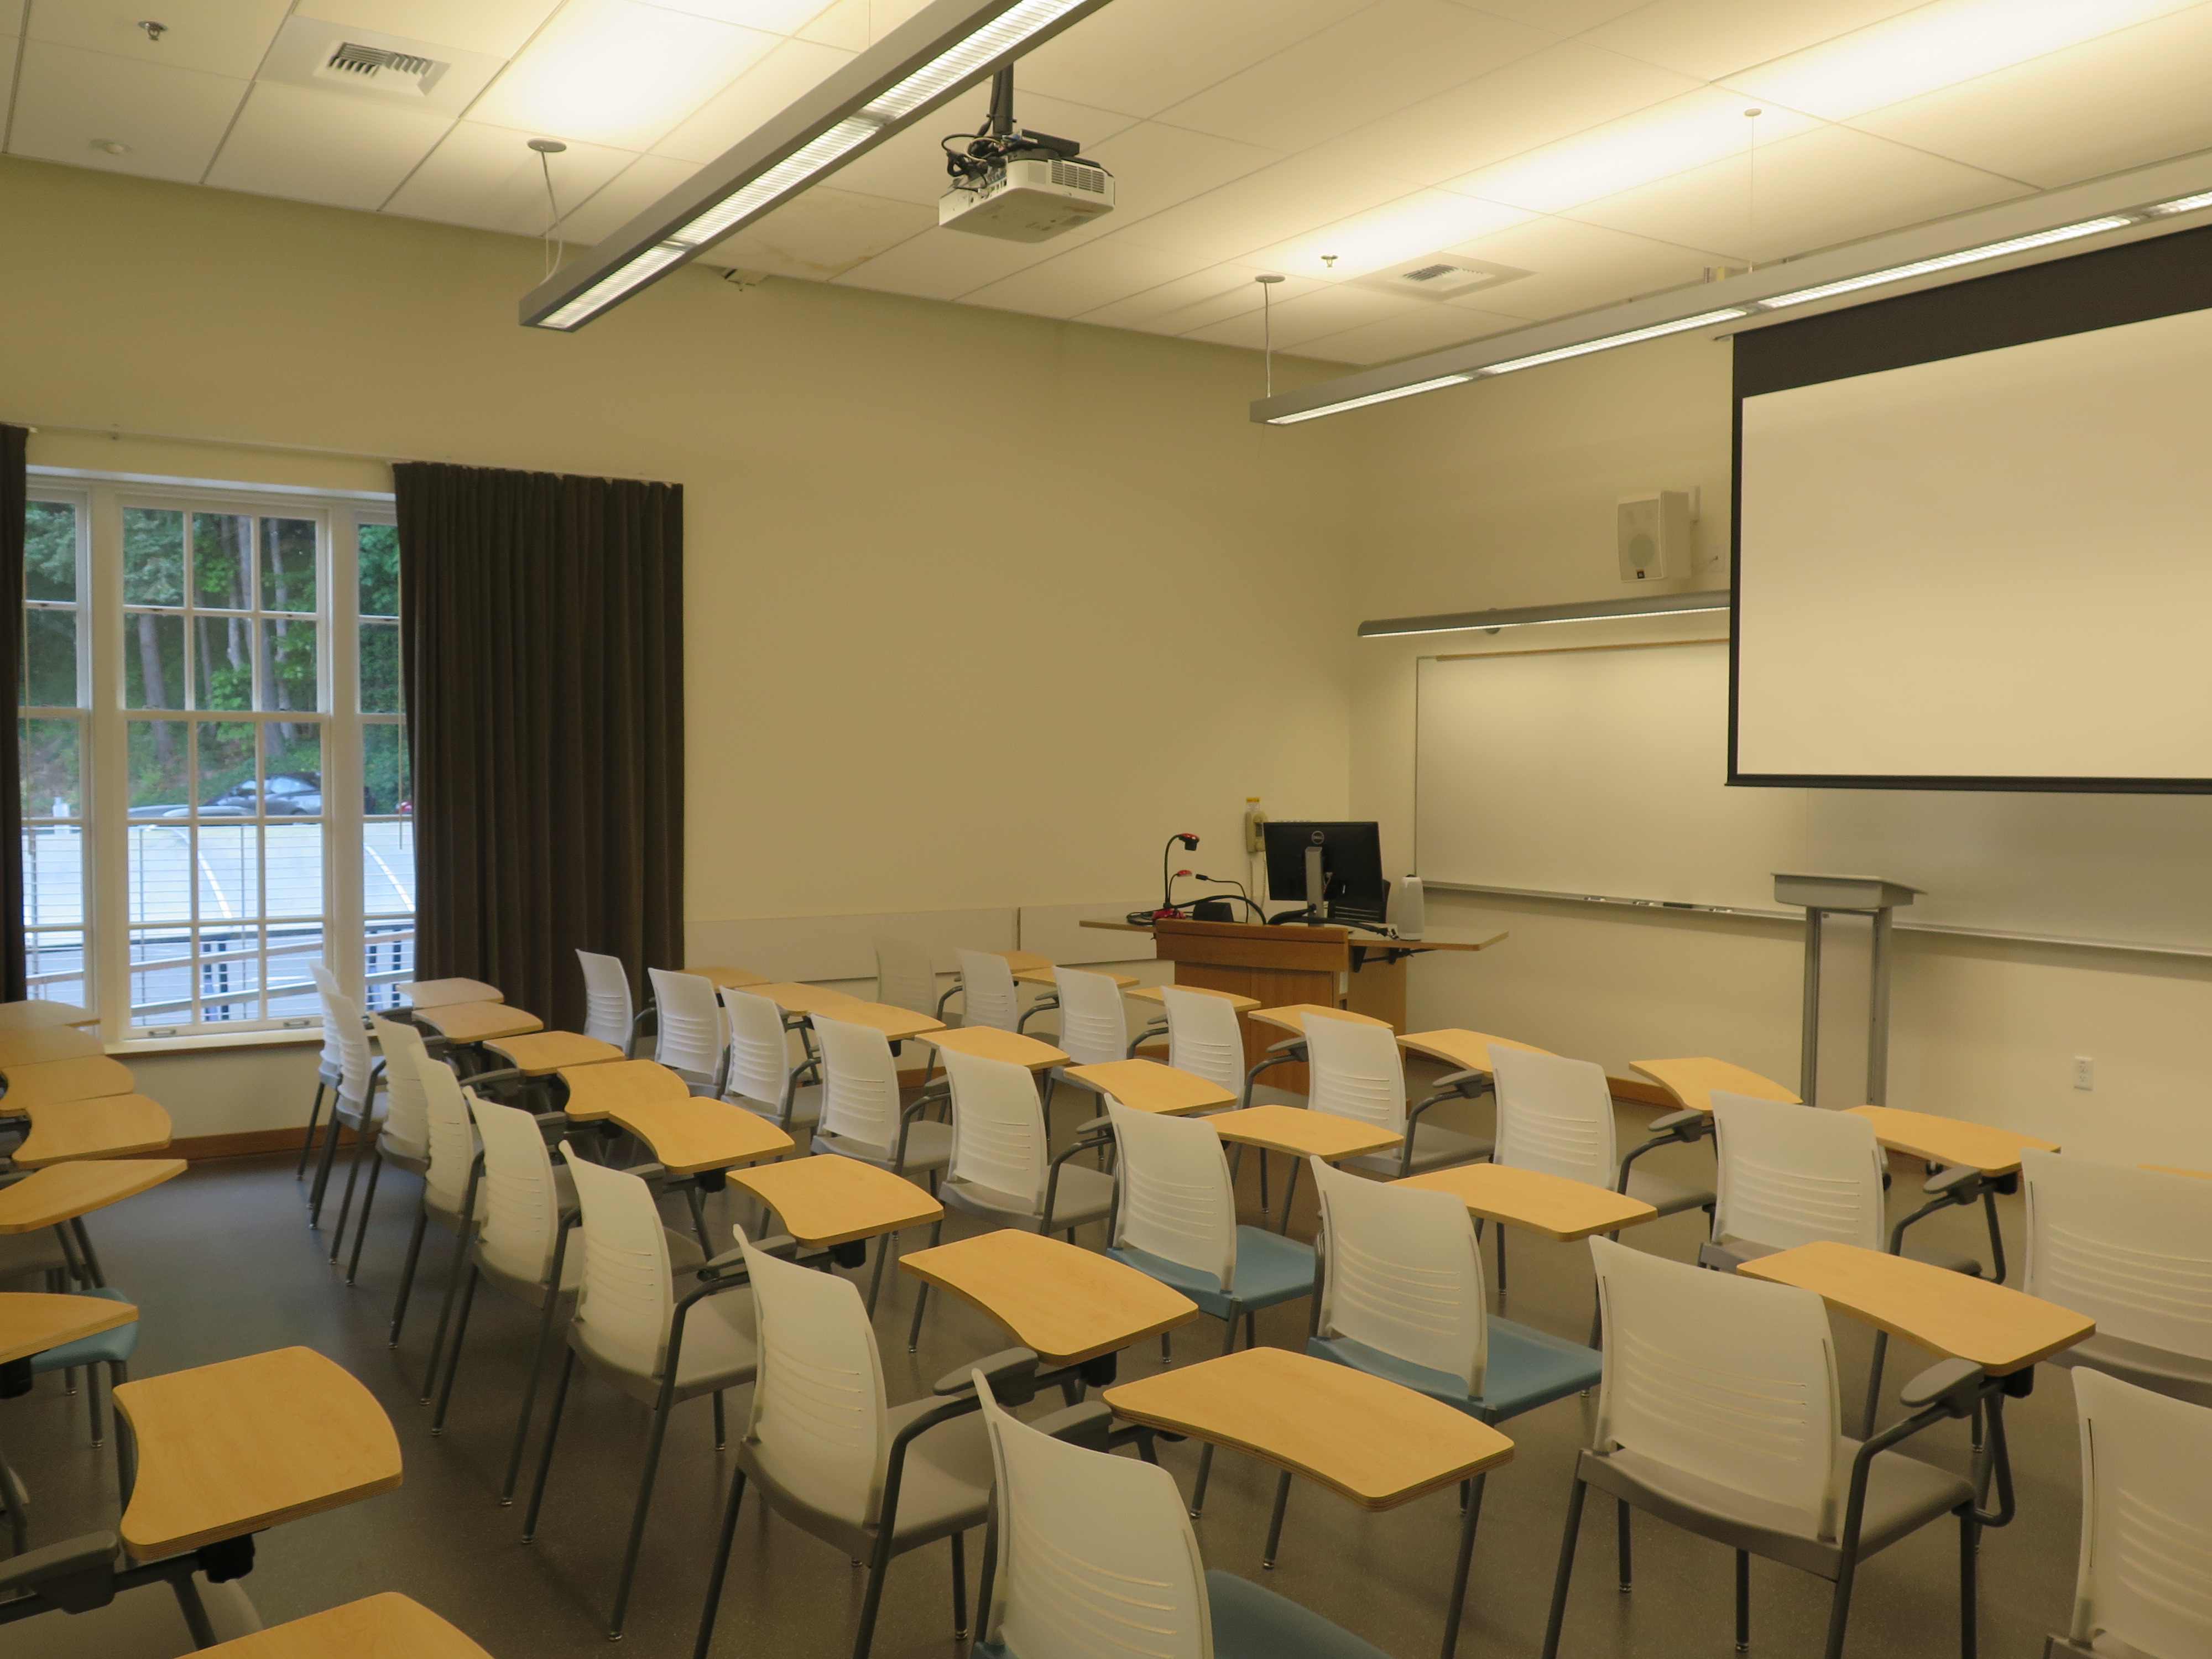 Room Consists of hard floors, moveable tablet armchairs, a white board and podium are both located at the front of the room with another whiteboard located on the right wall of the room.